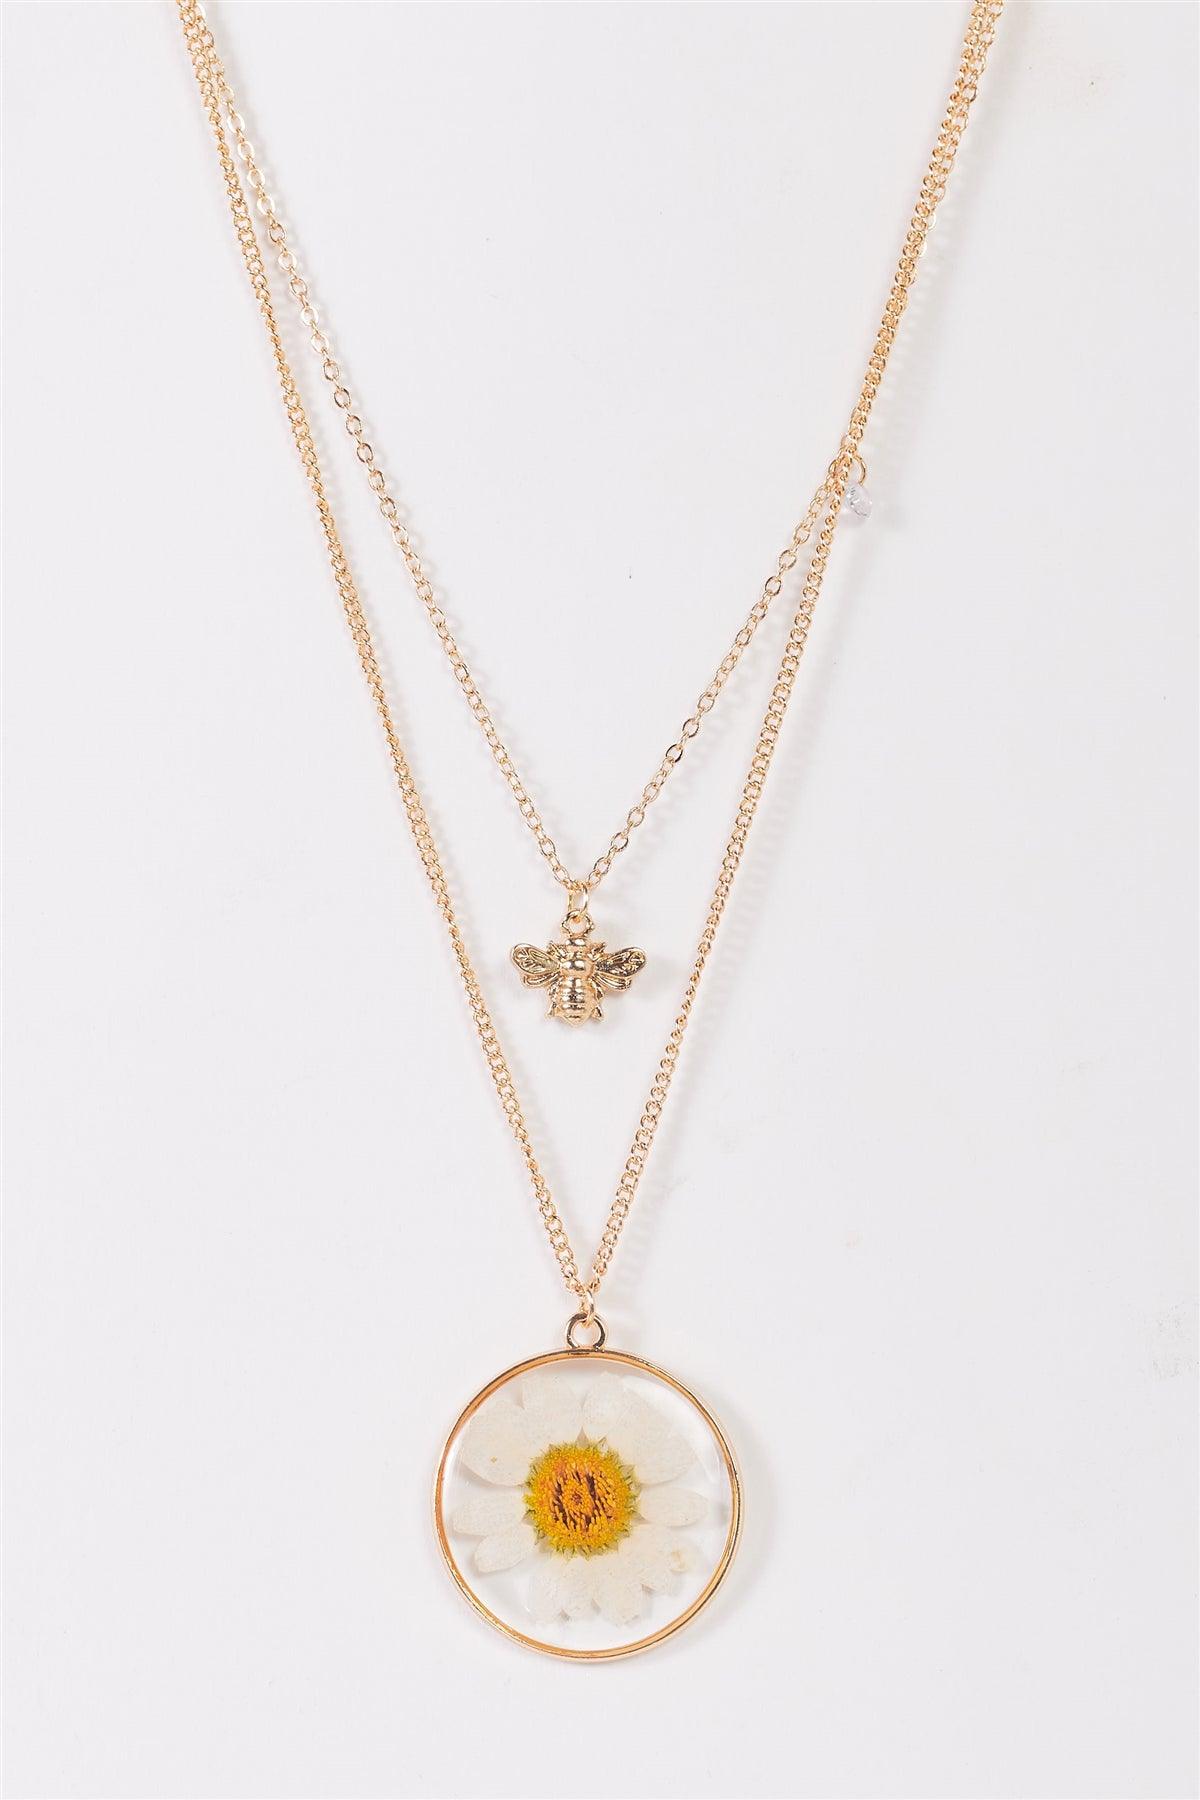 Jewelry- Necklace- Gold Chain Real Daisy Bee Faux Diamond Pendants Necklace